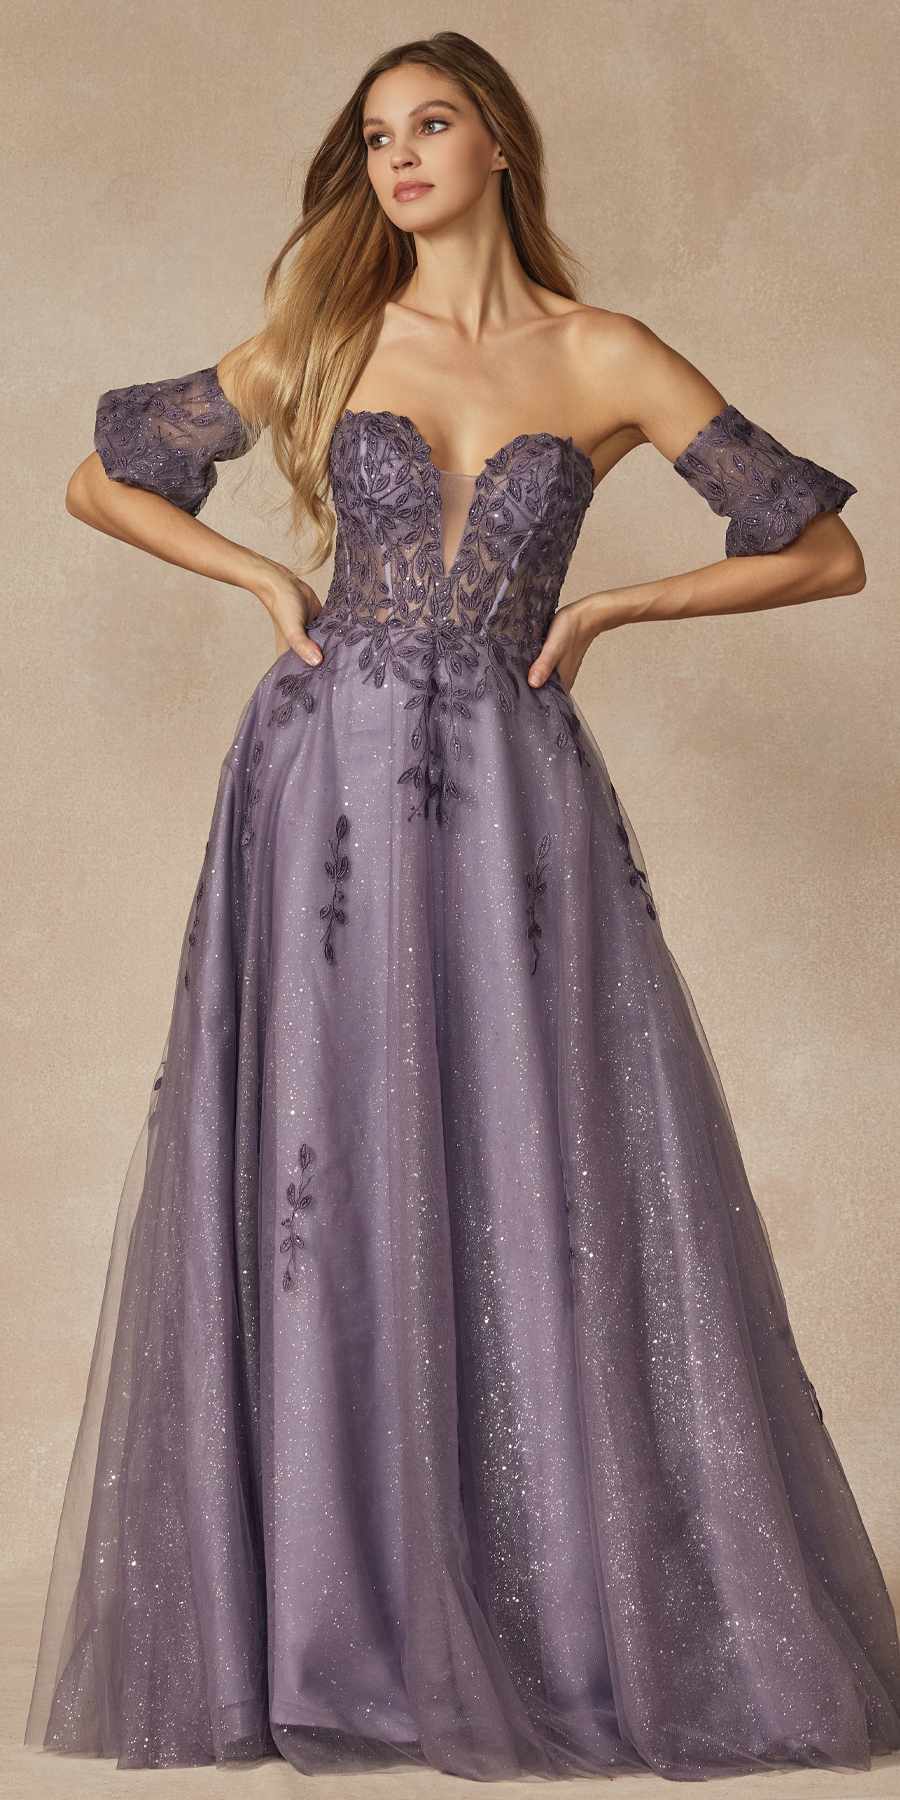 Juliet 2409 Floor Length A-Line Leaf Embroidered Gown Detachable Sleeves